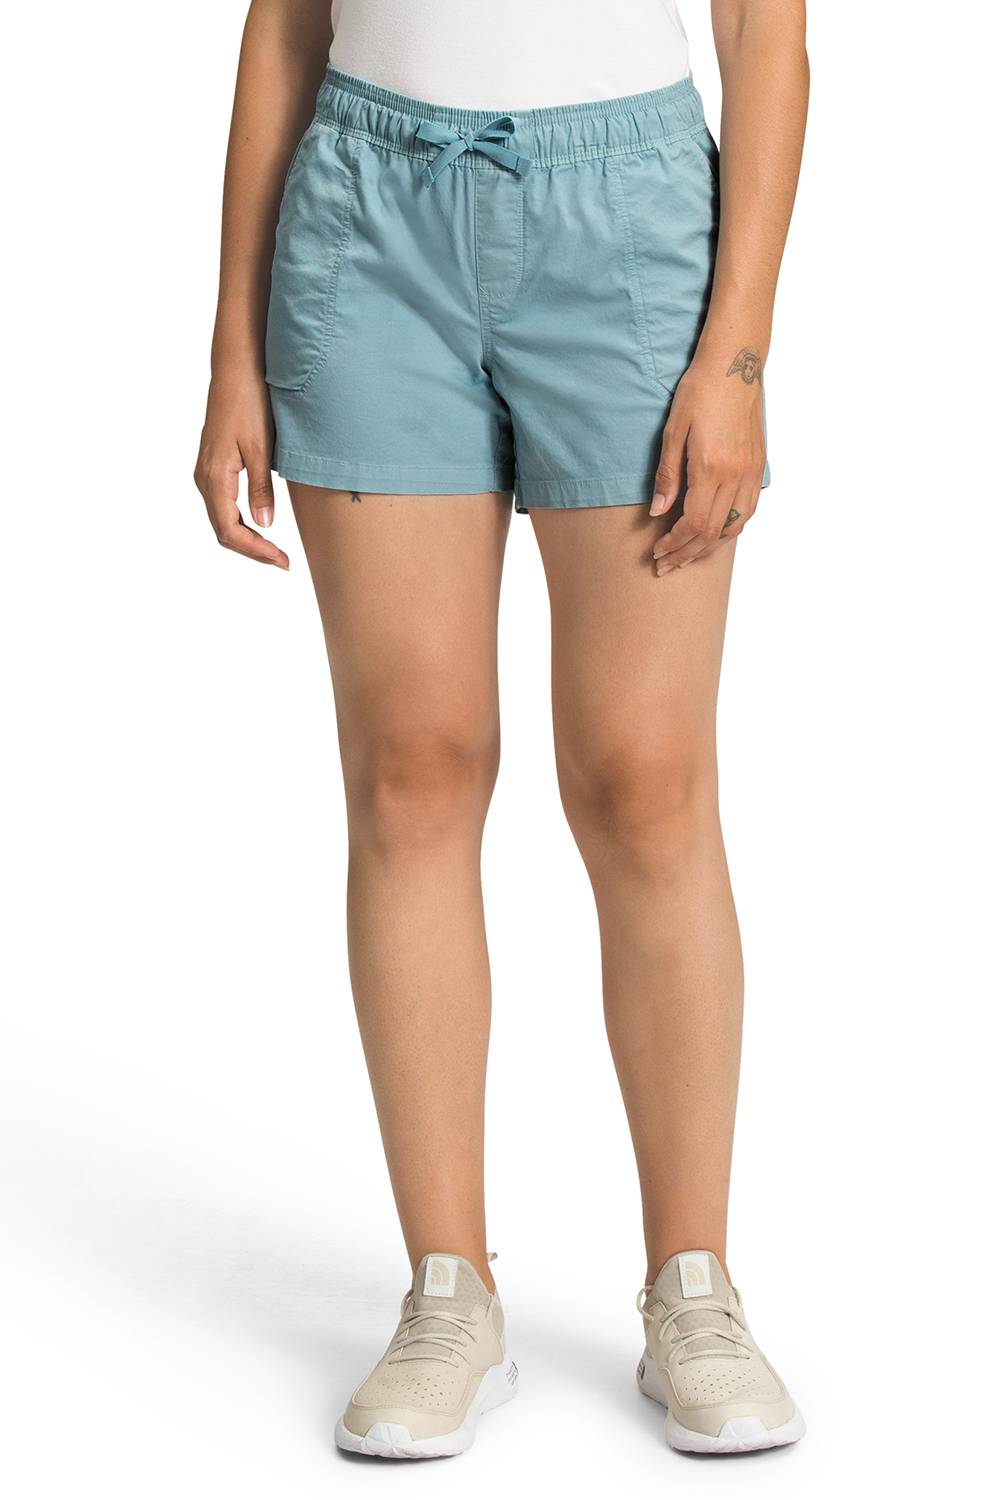 THE NORTH FACE - Short Deportivo Outdoor Mujer The North Face